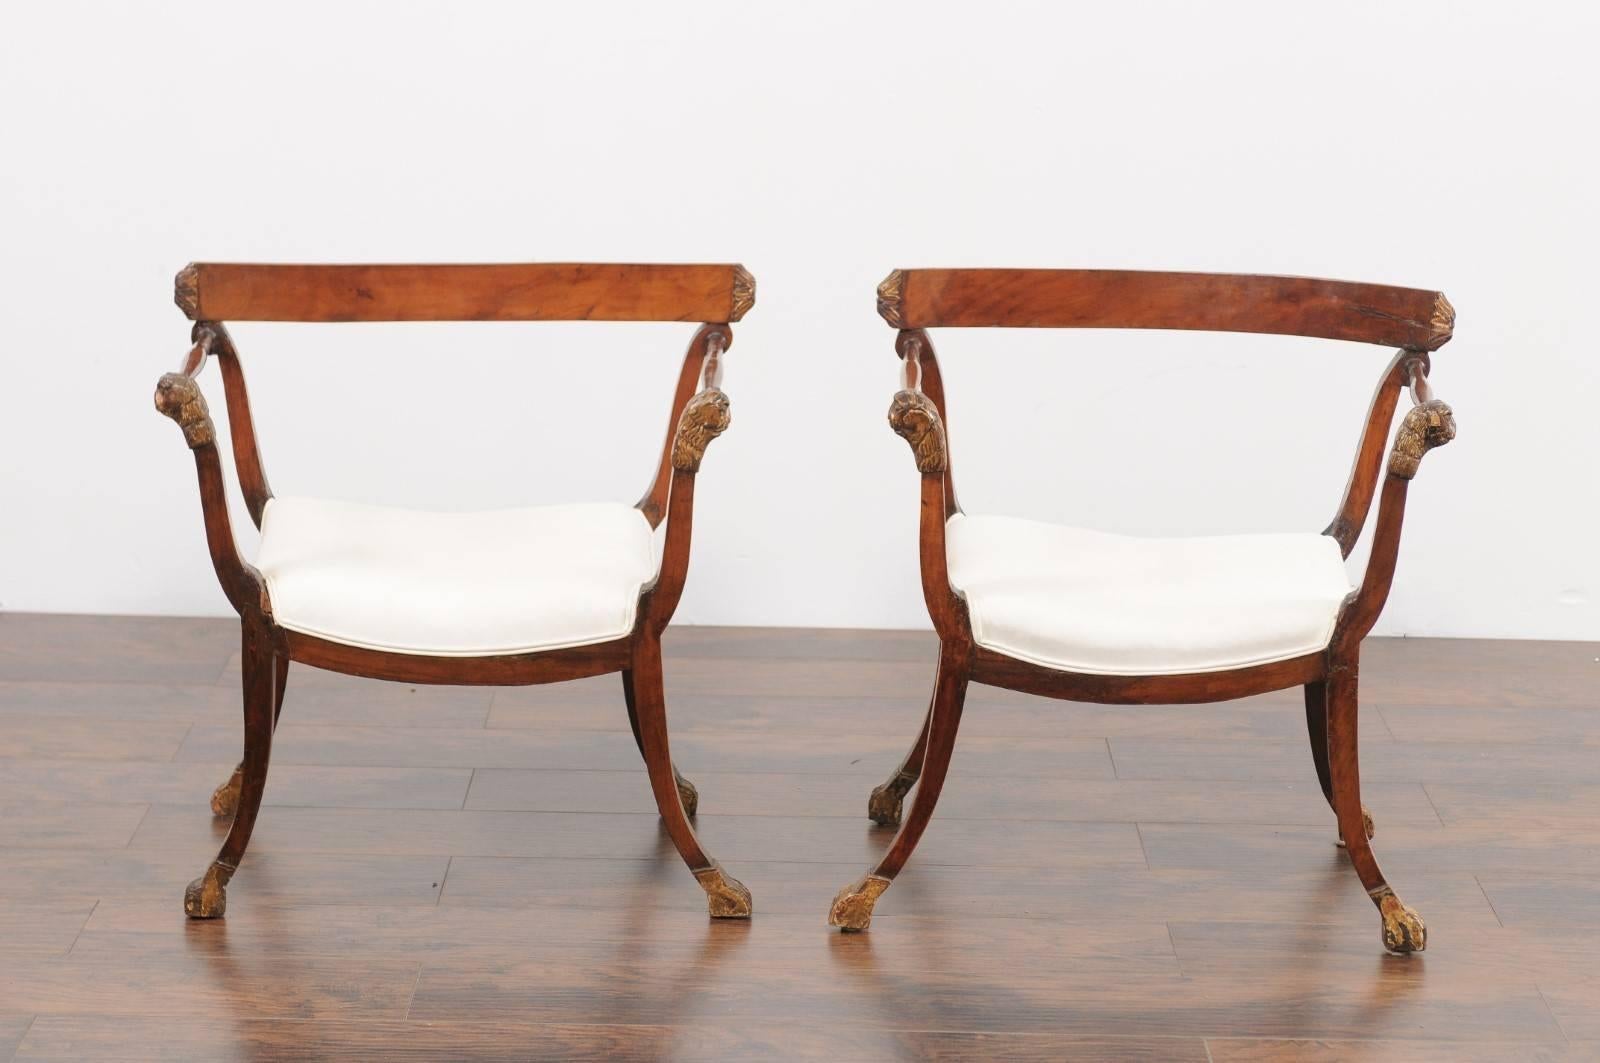 Pair of 18th Century Italian Upholstered Seat Walnut Chairs with Lion Details 1